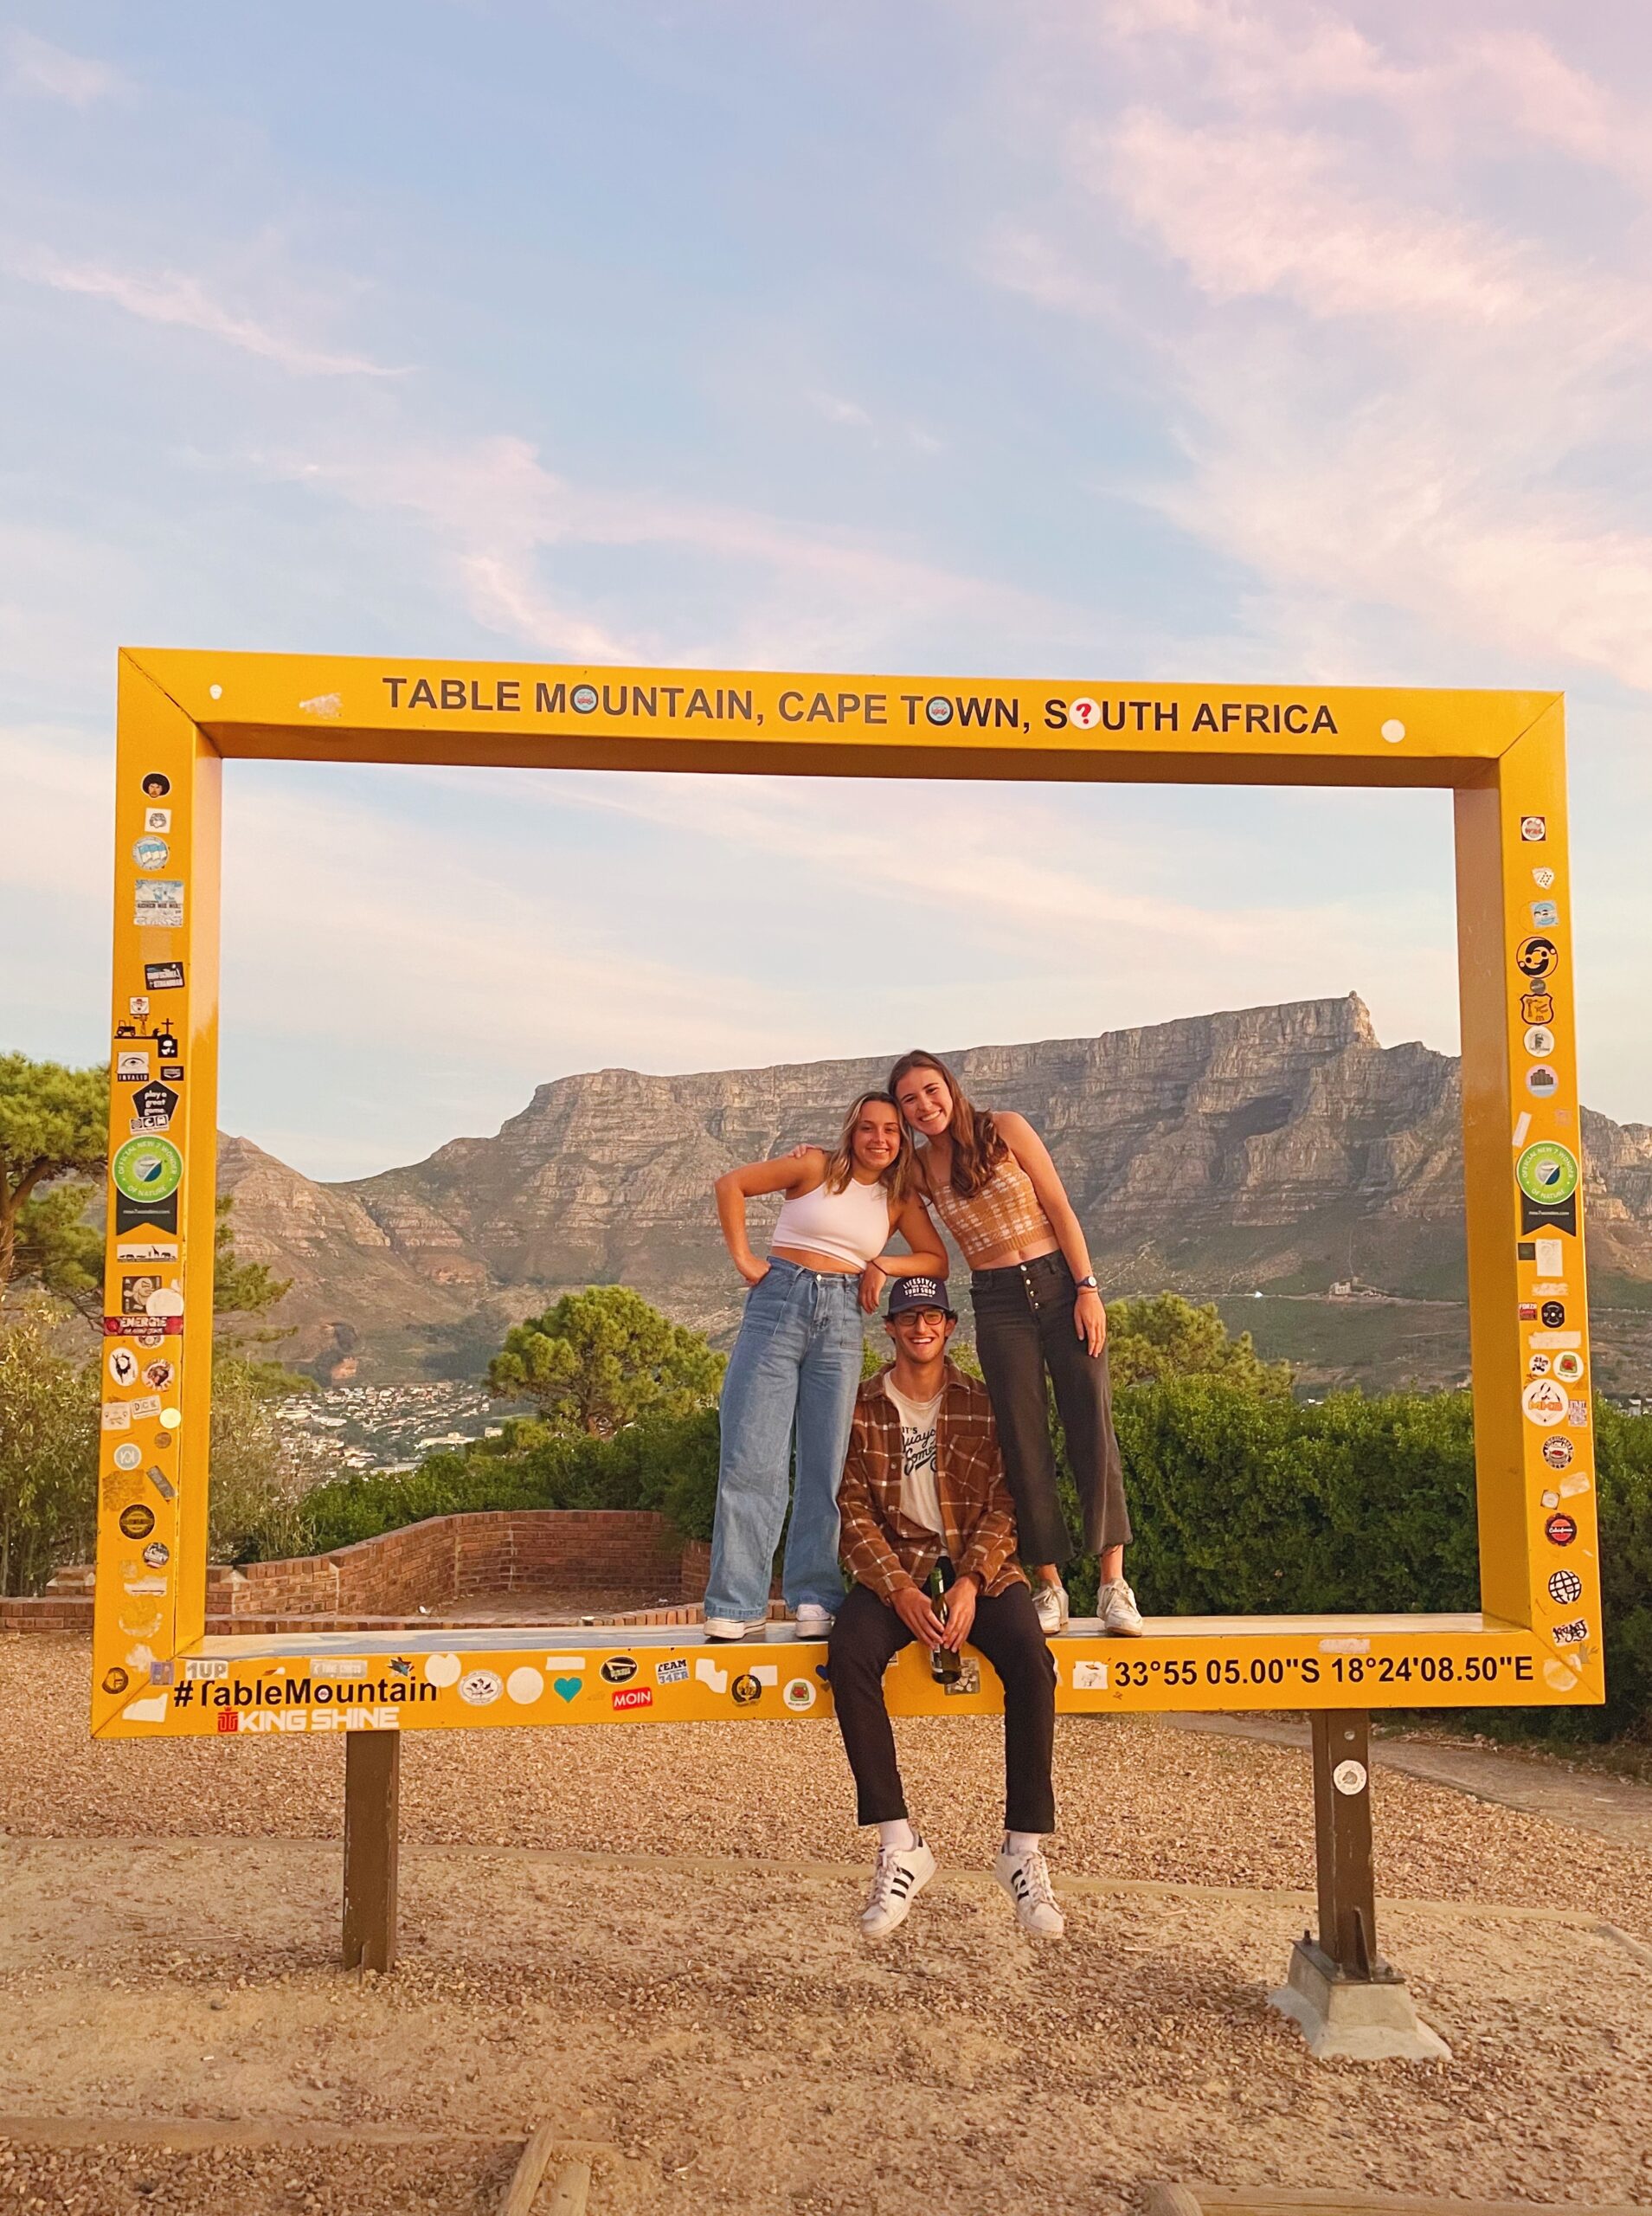 Three students inside a large rectangular frame marking a view of Cape Town's Table Mountain